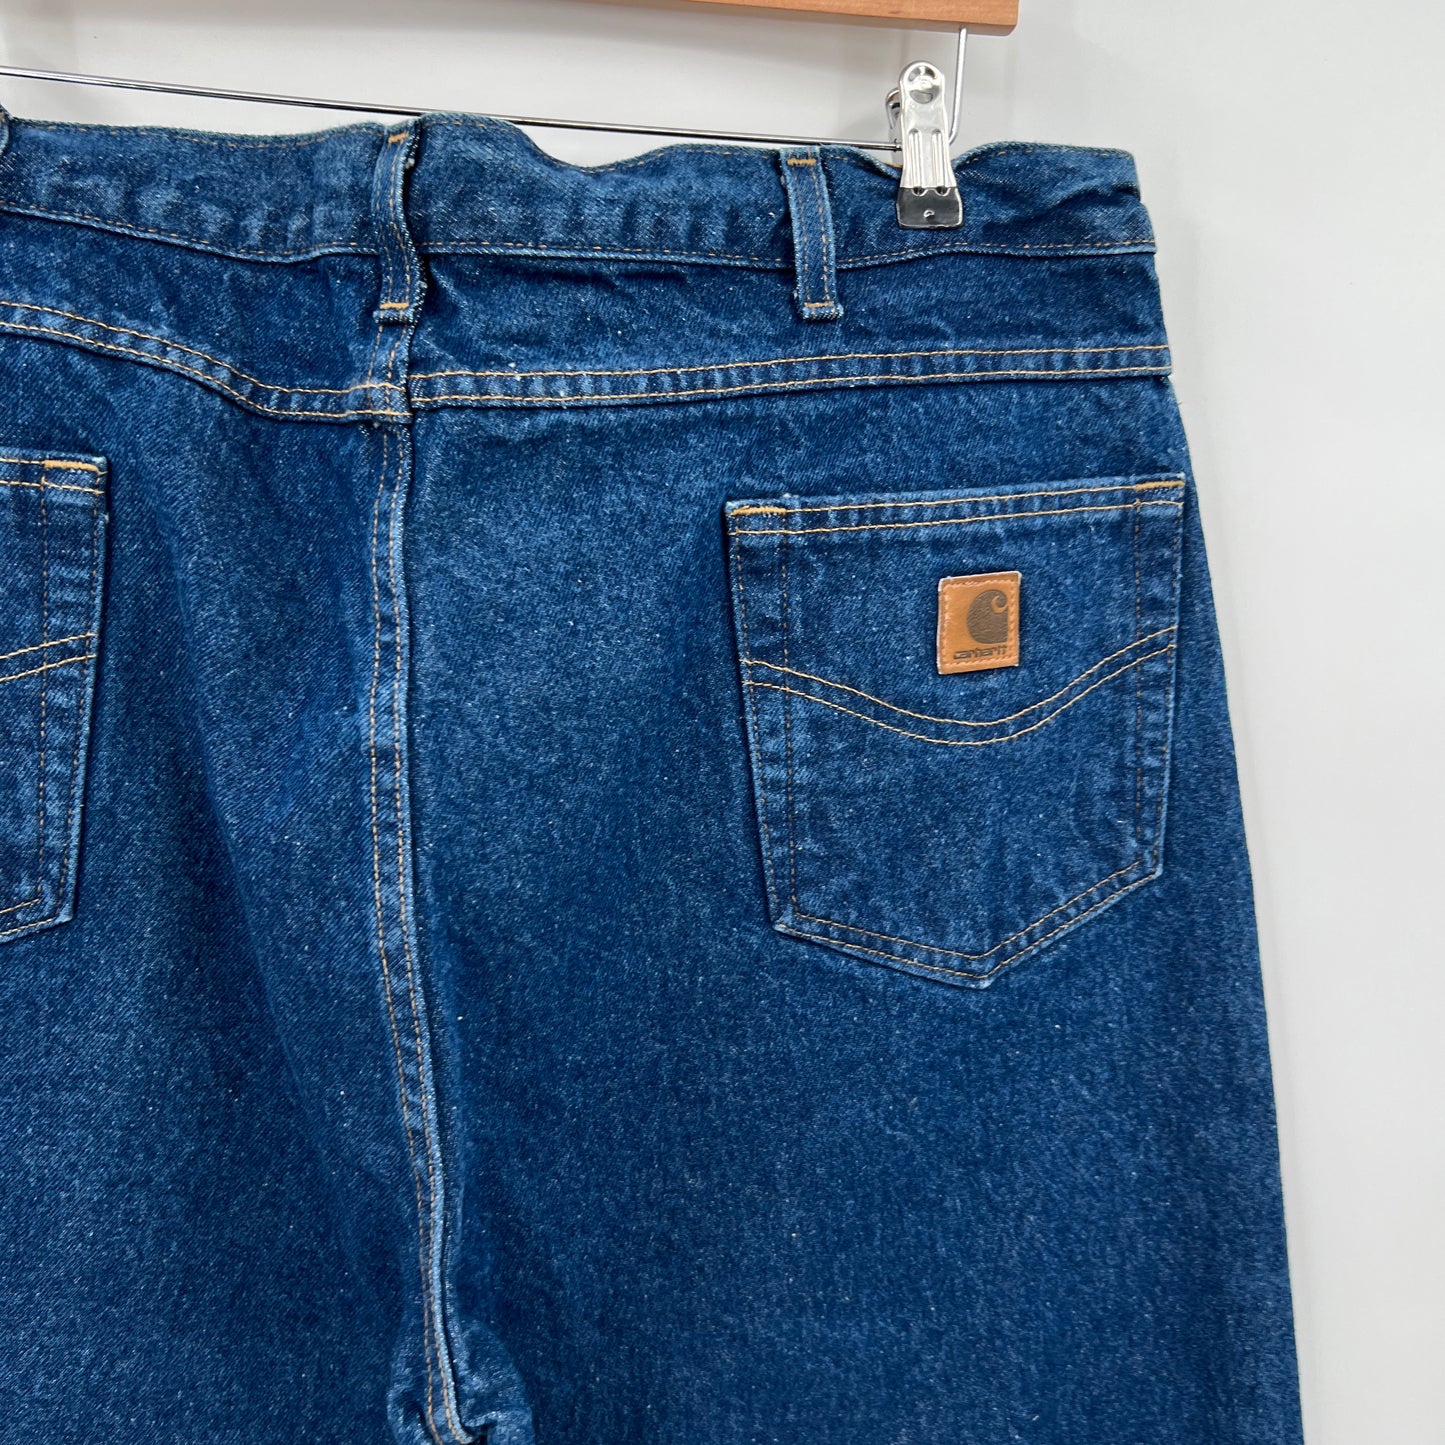 SOLD - Carhartt Relax Fit Blue Jeans 42x34